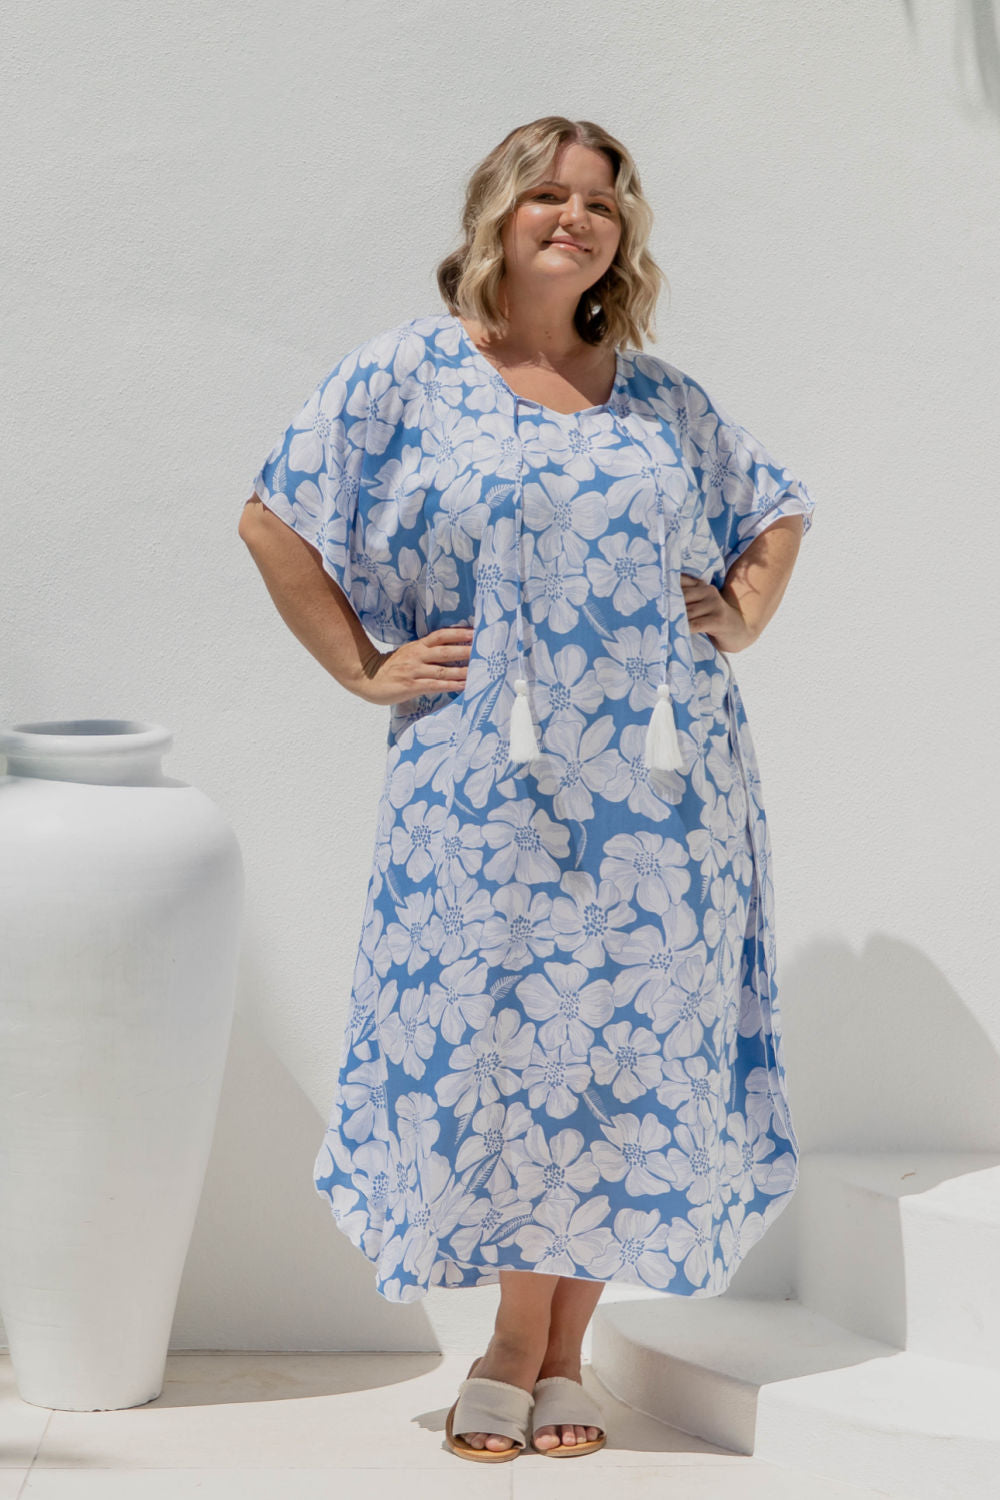 Plus Size Dresses for Casual Days - Holley Day Australia